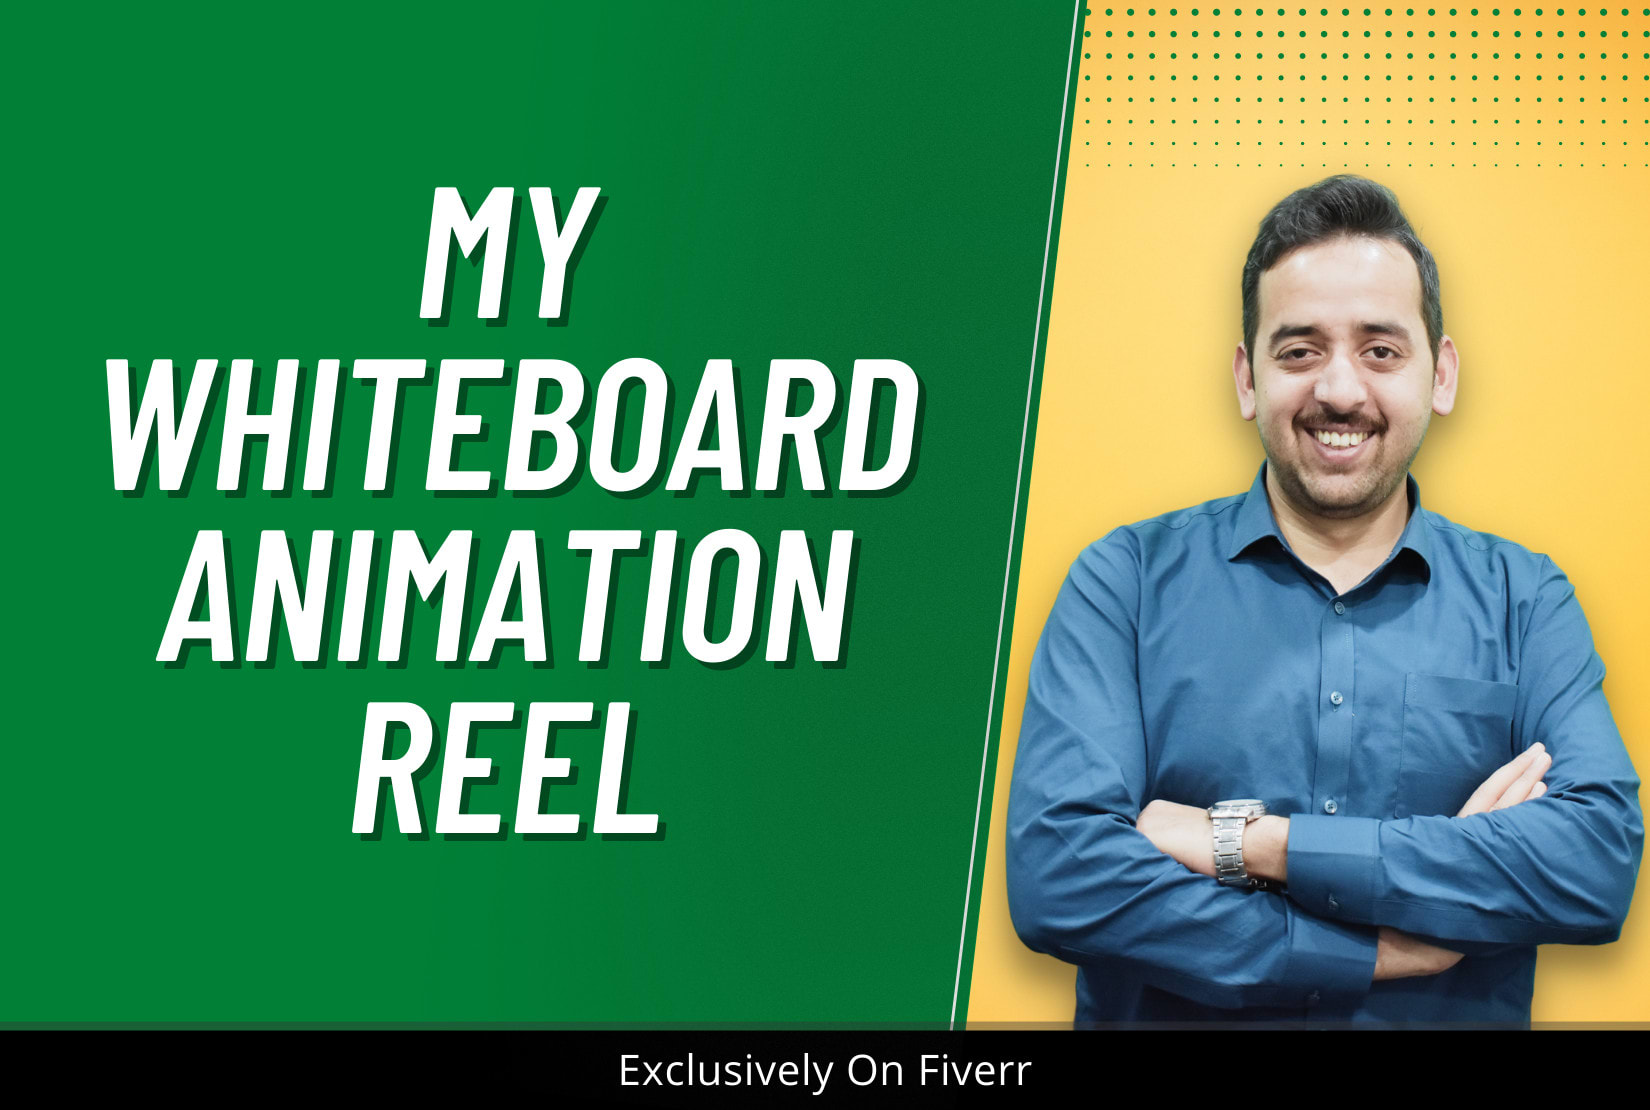 Make whiteboard animation or animated youtube video in 24h by Worddesignpro  | Fiverr